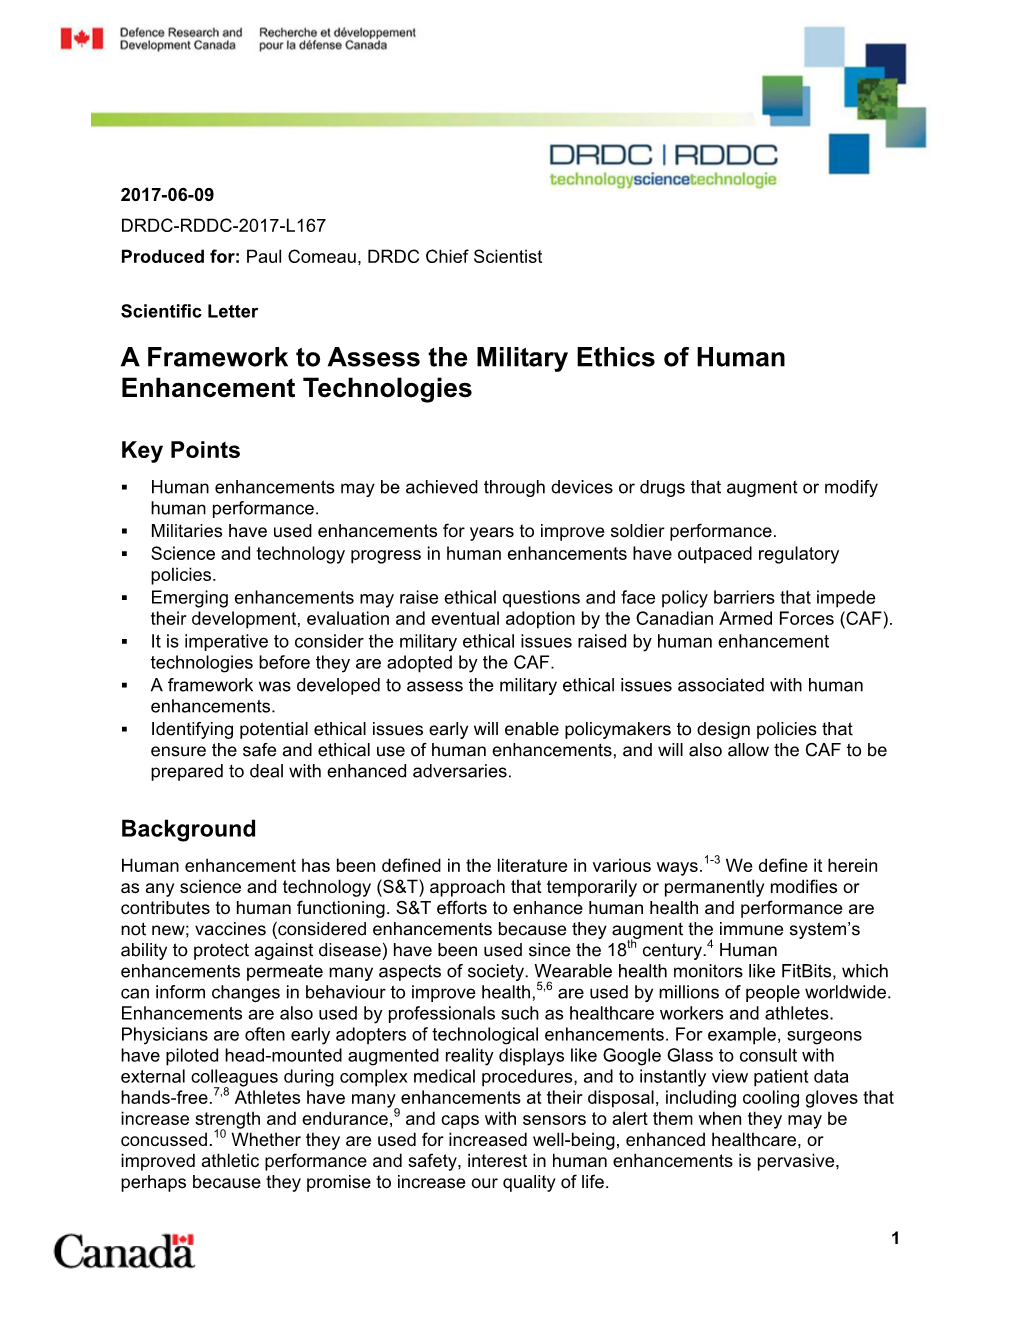 A Framework to Assess the Military Ethics of Human Enhancement Technologies